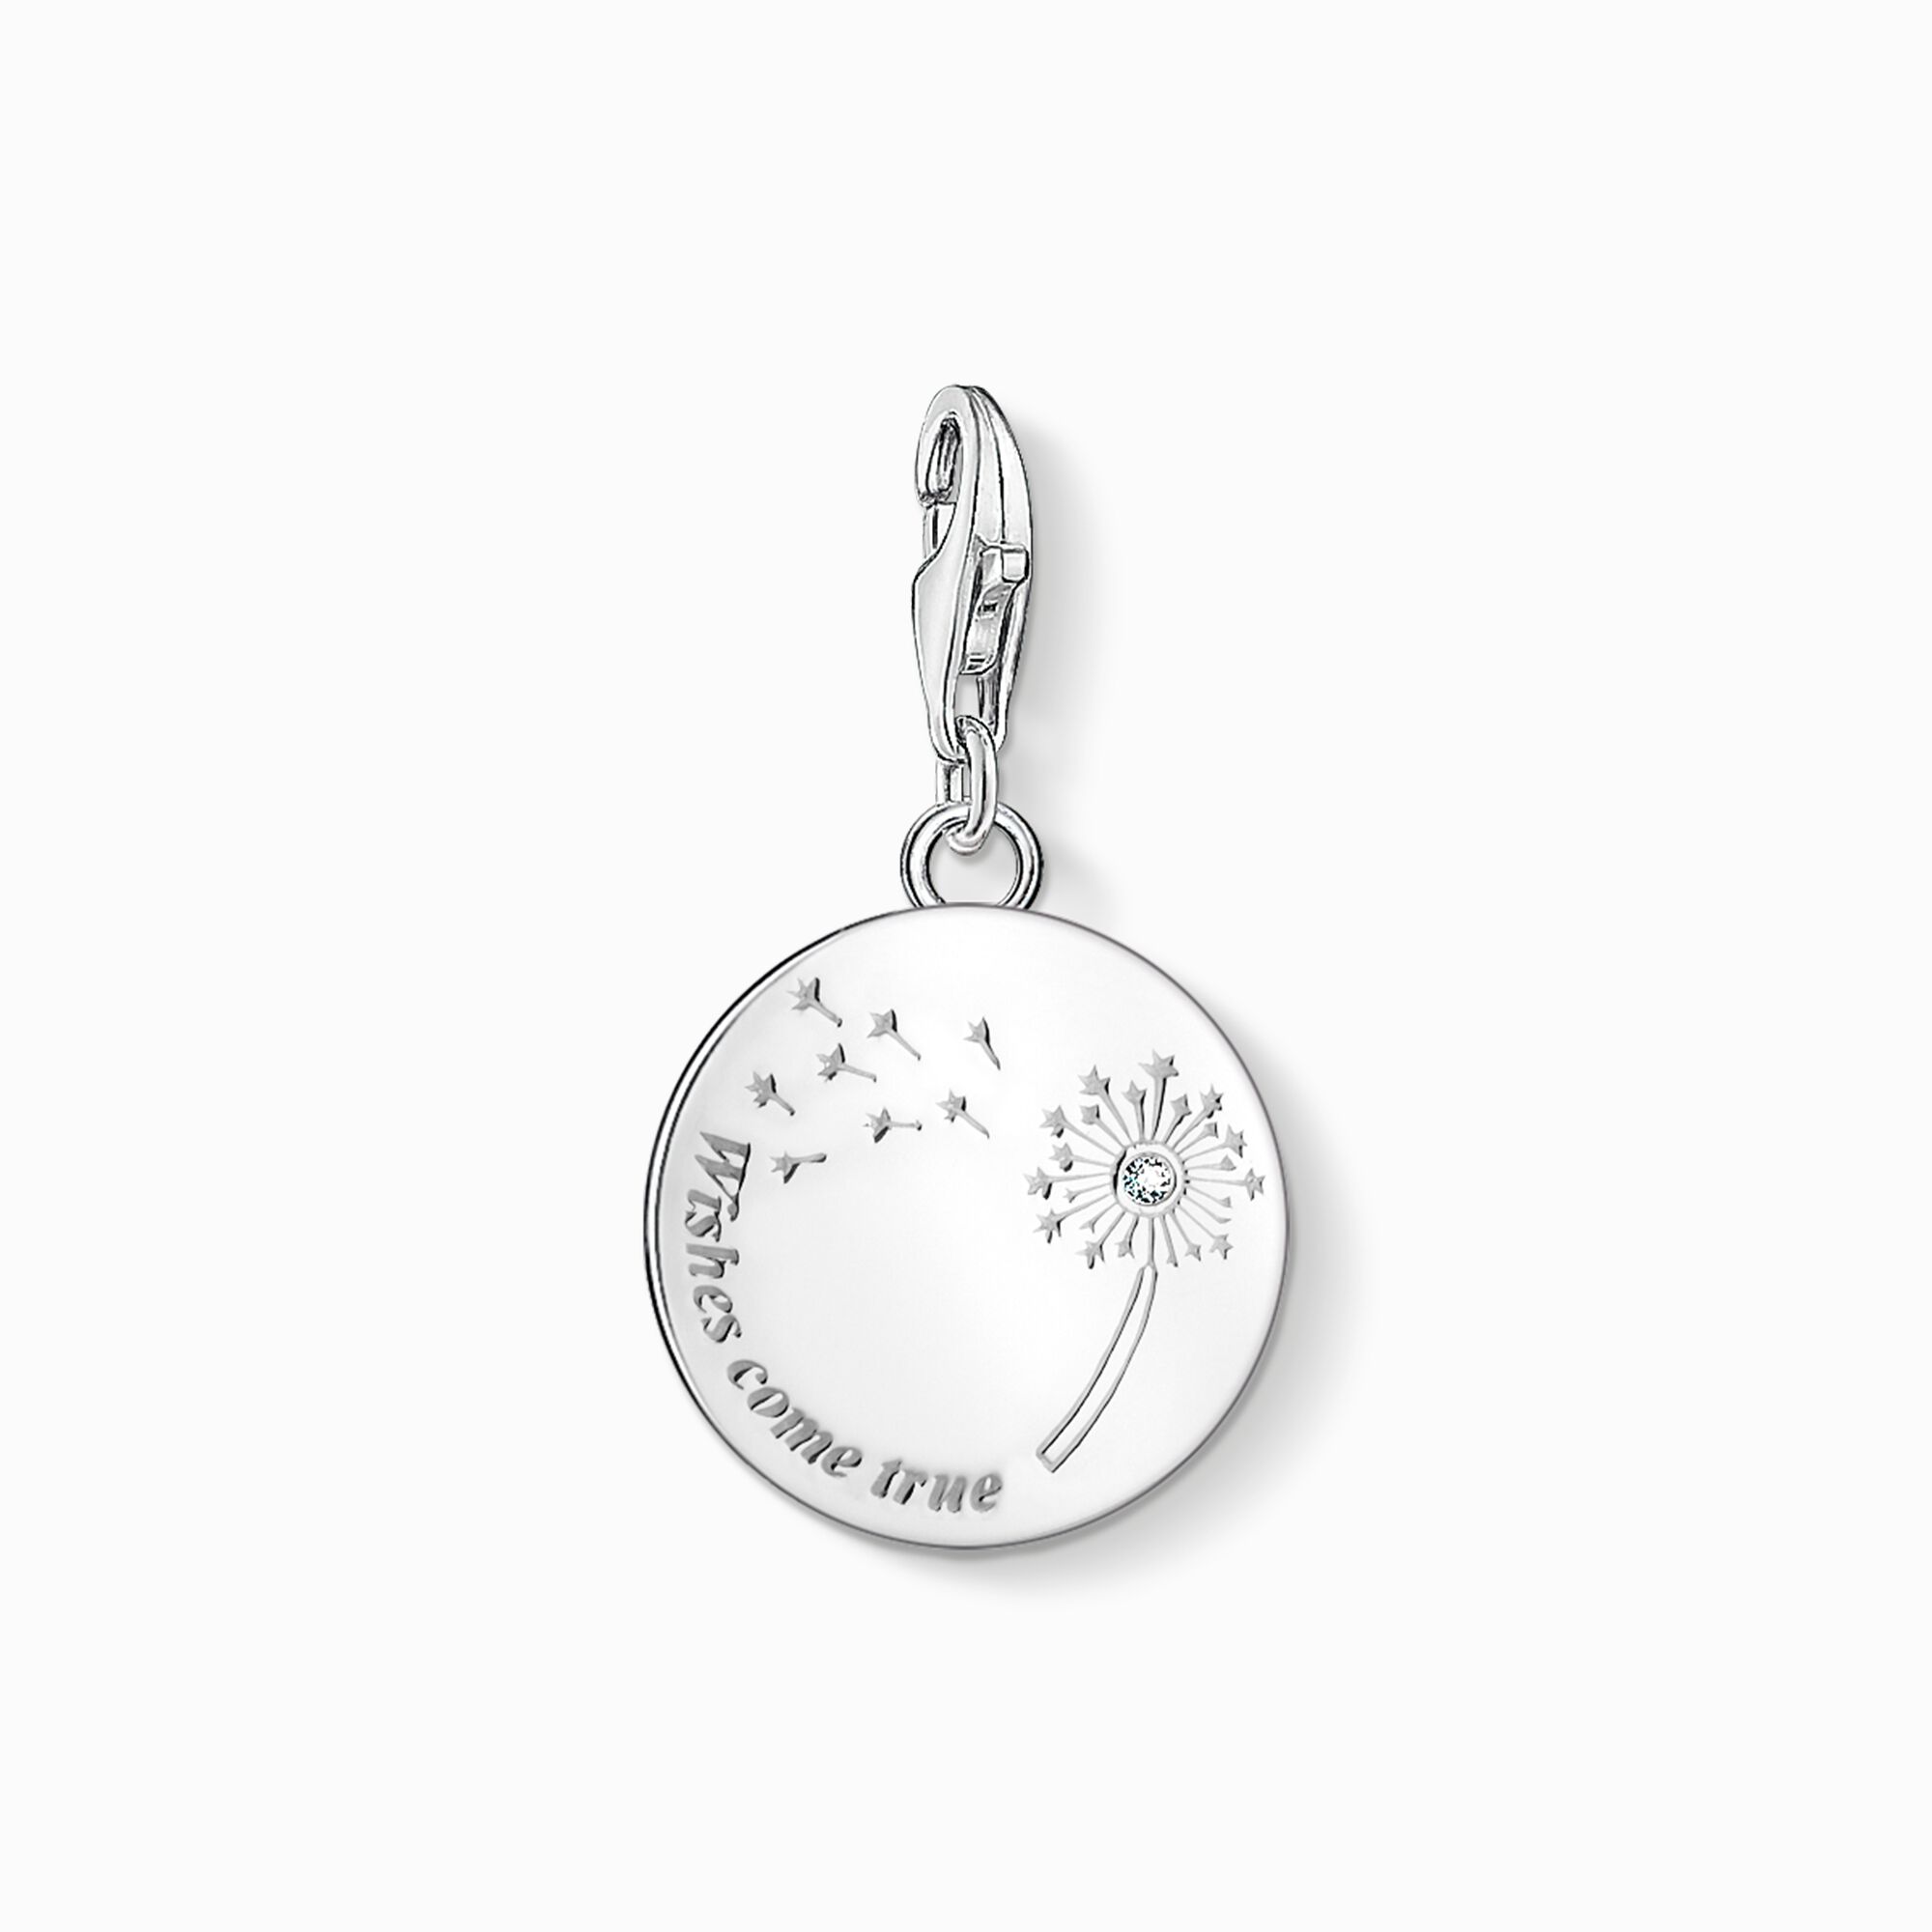 Charm pendant dandelion wishes come true from the Charm Club collection in the THOMAS SABO online store